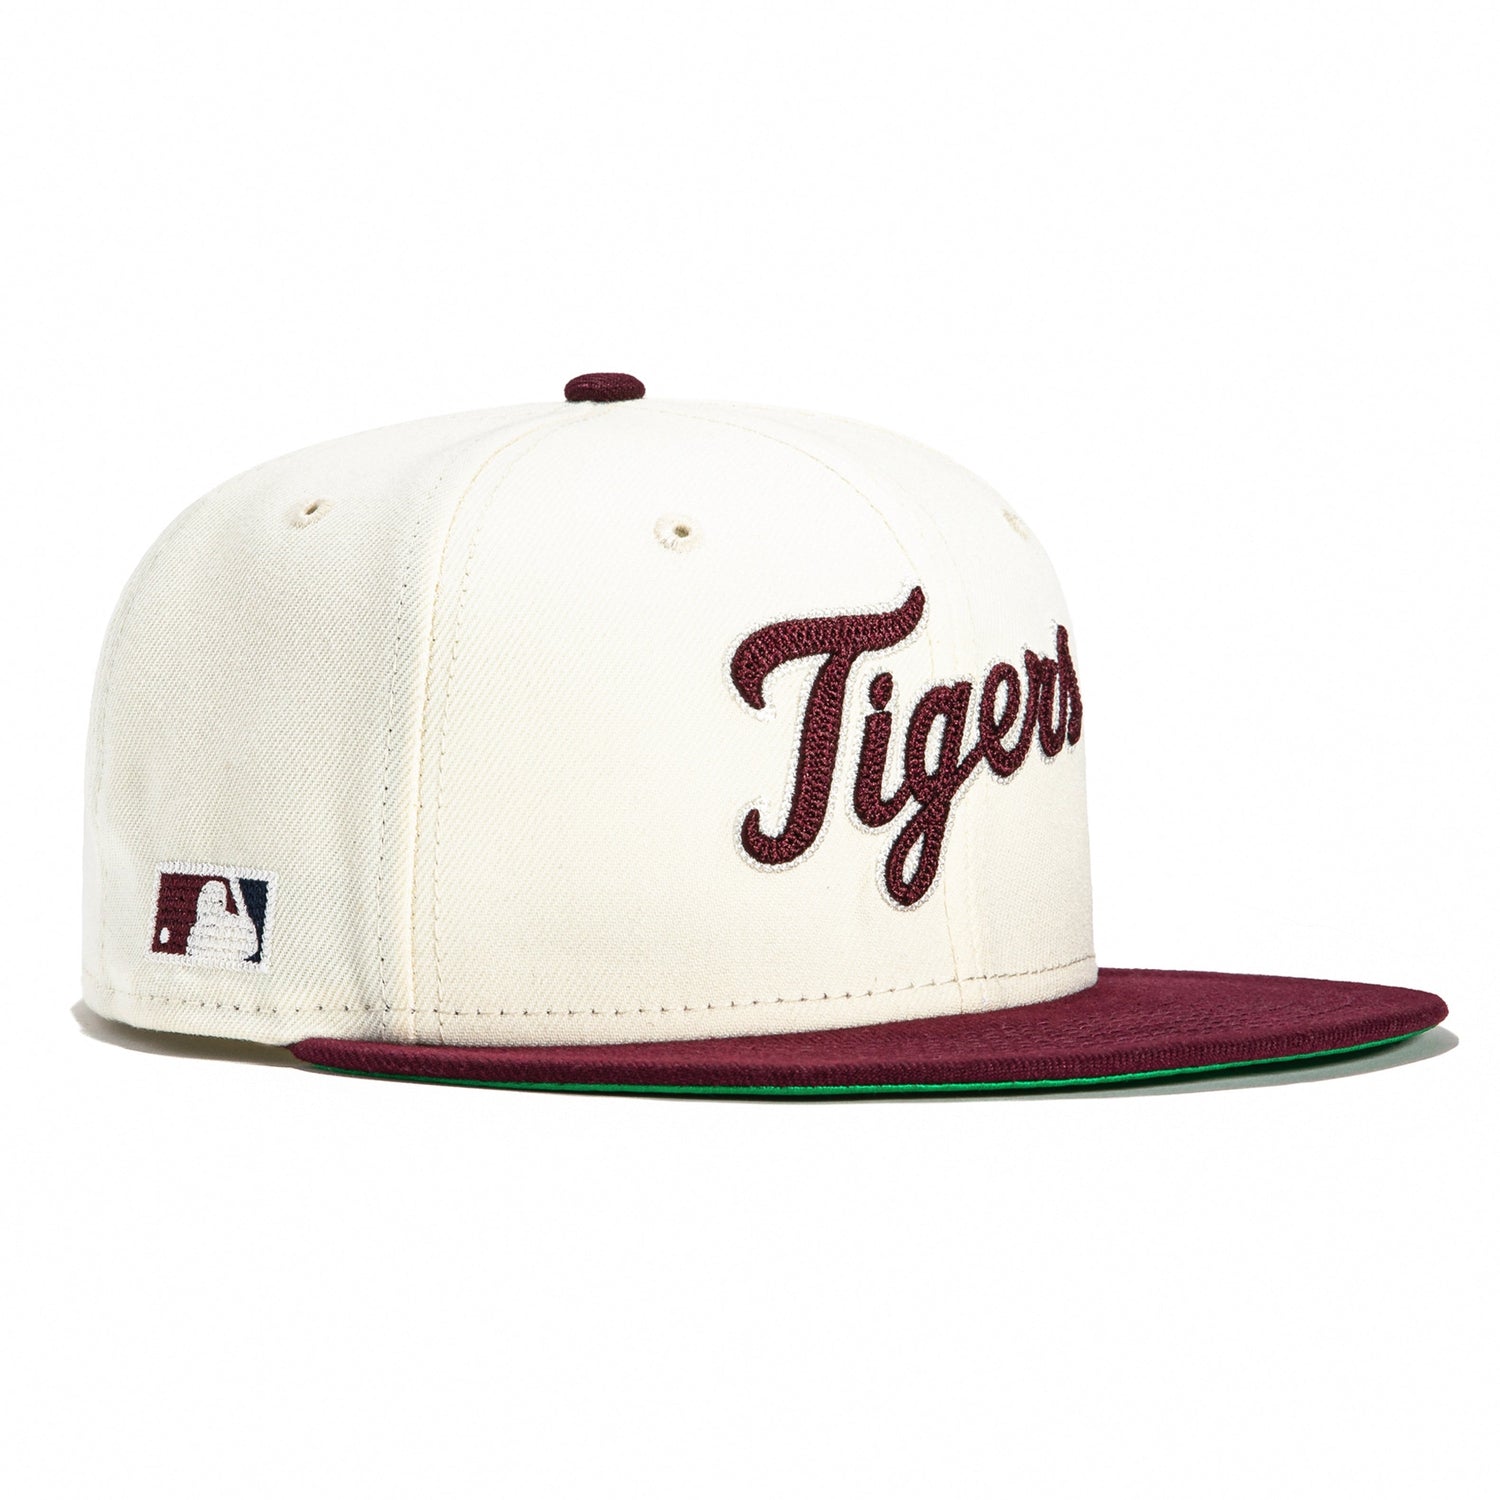 Detroit Tigers Vintage Clothing, Tigers Throwback Hats, Tigers